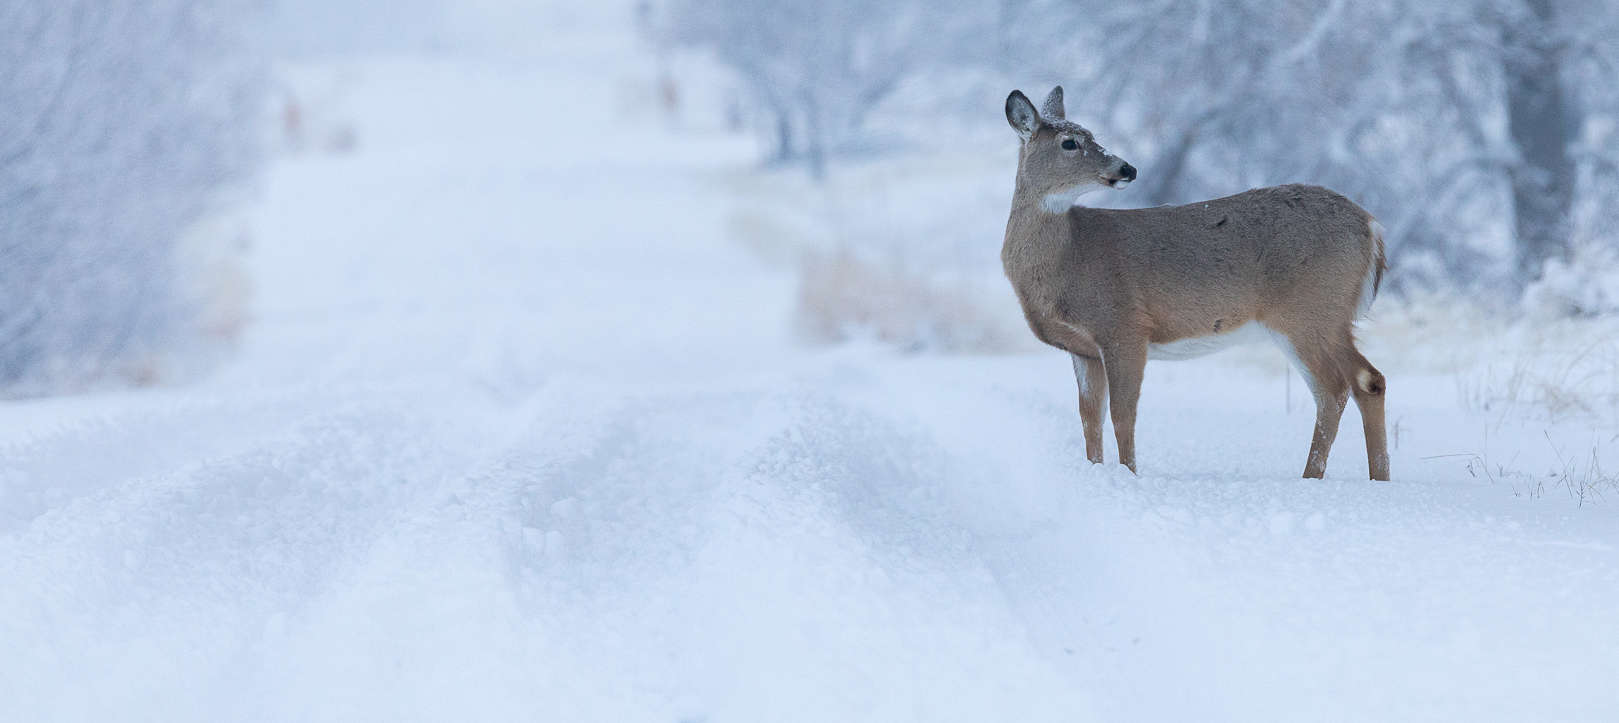 New lighting system helps deer avoid vehicles at night - The Wildlife  Society